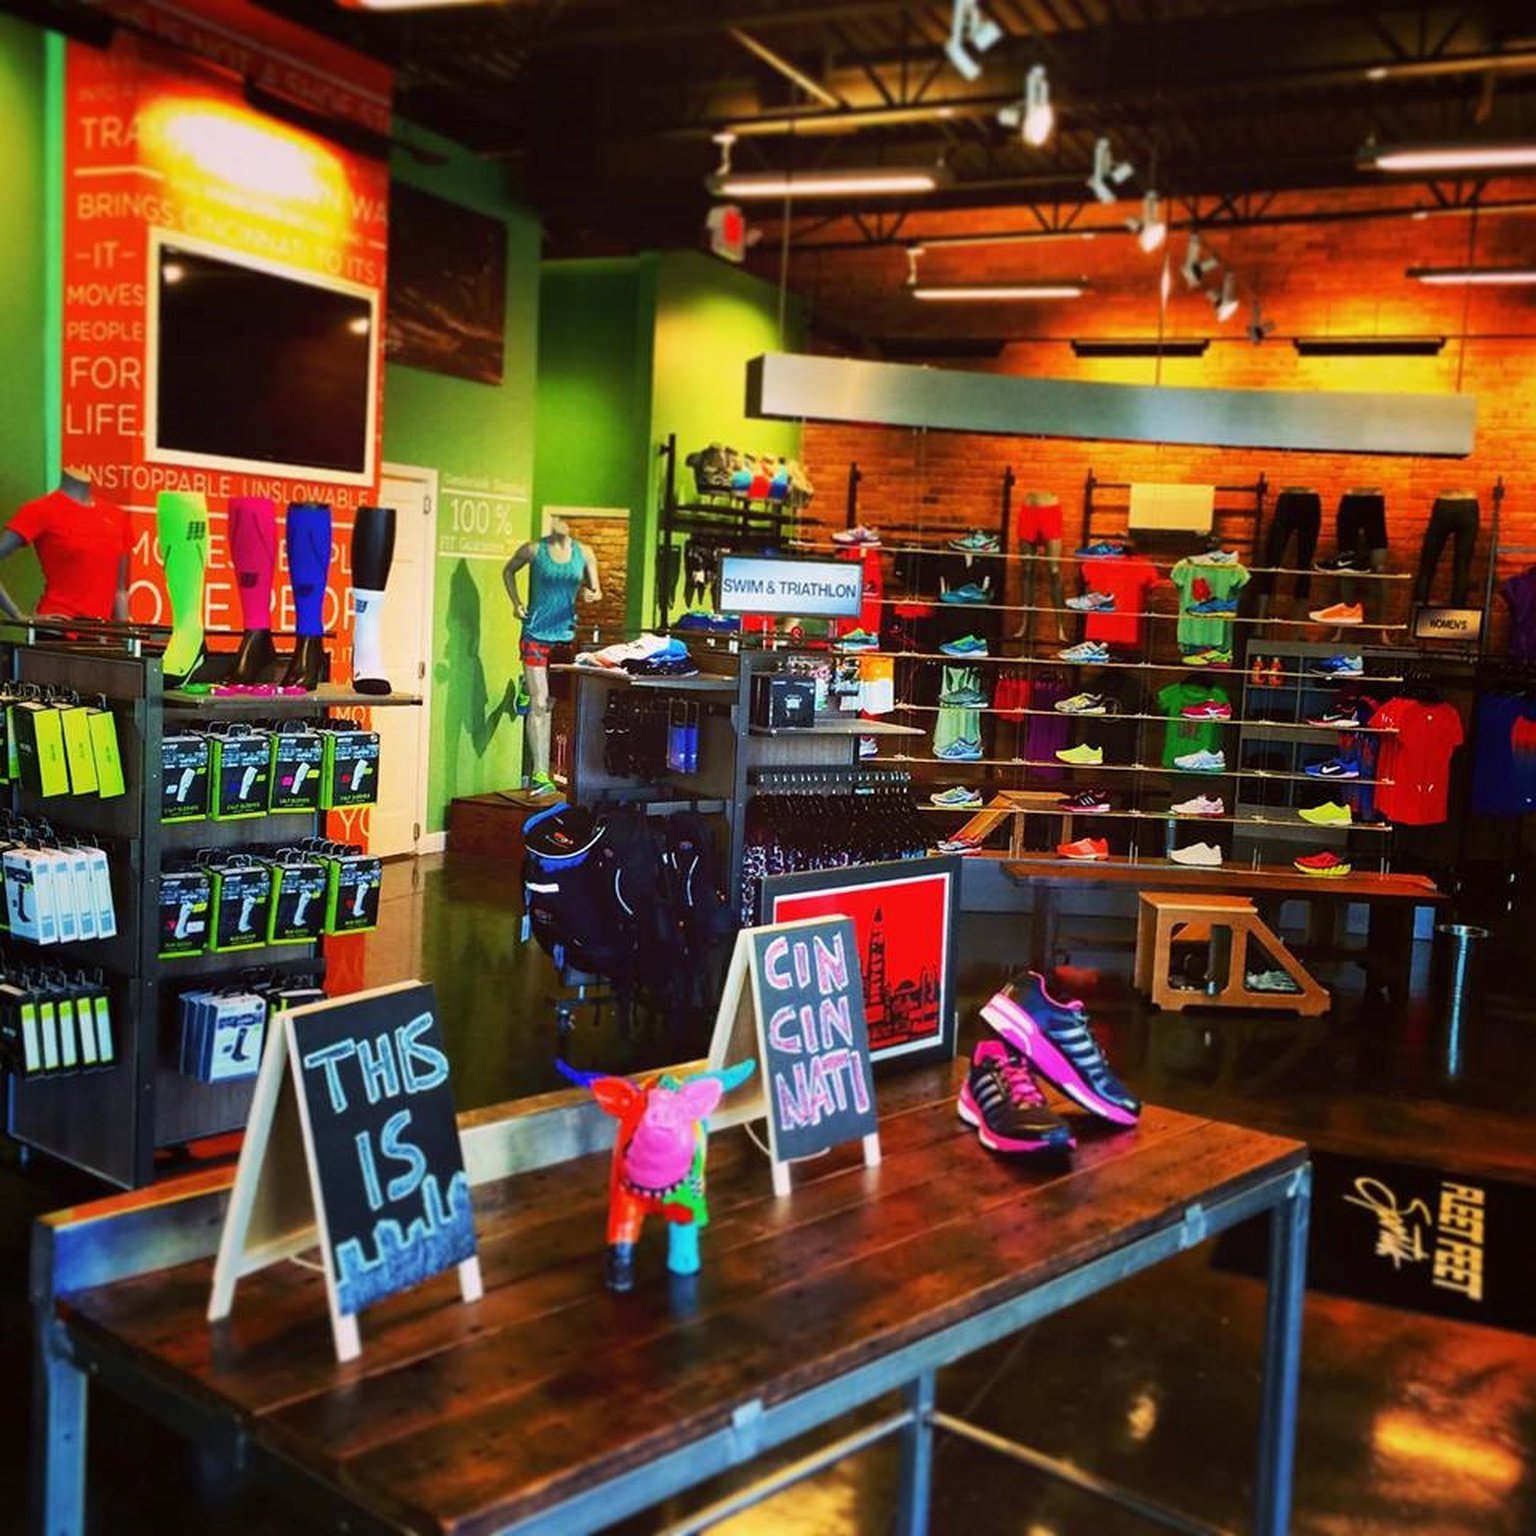 Local running retailer to open third location in Butler County